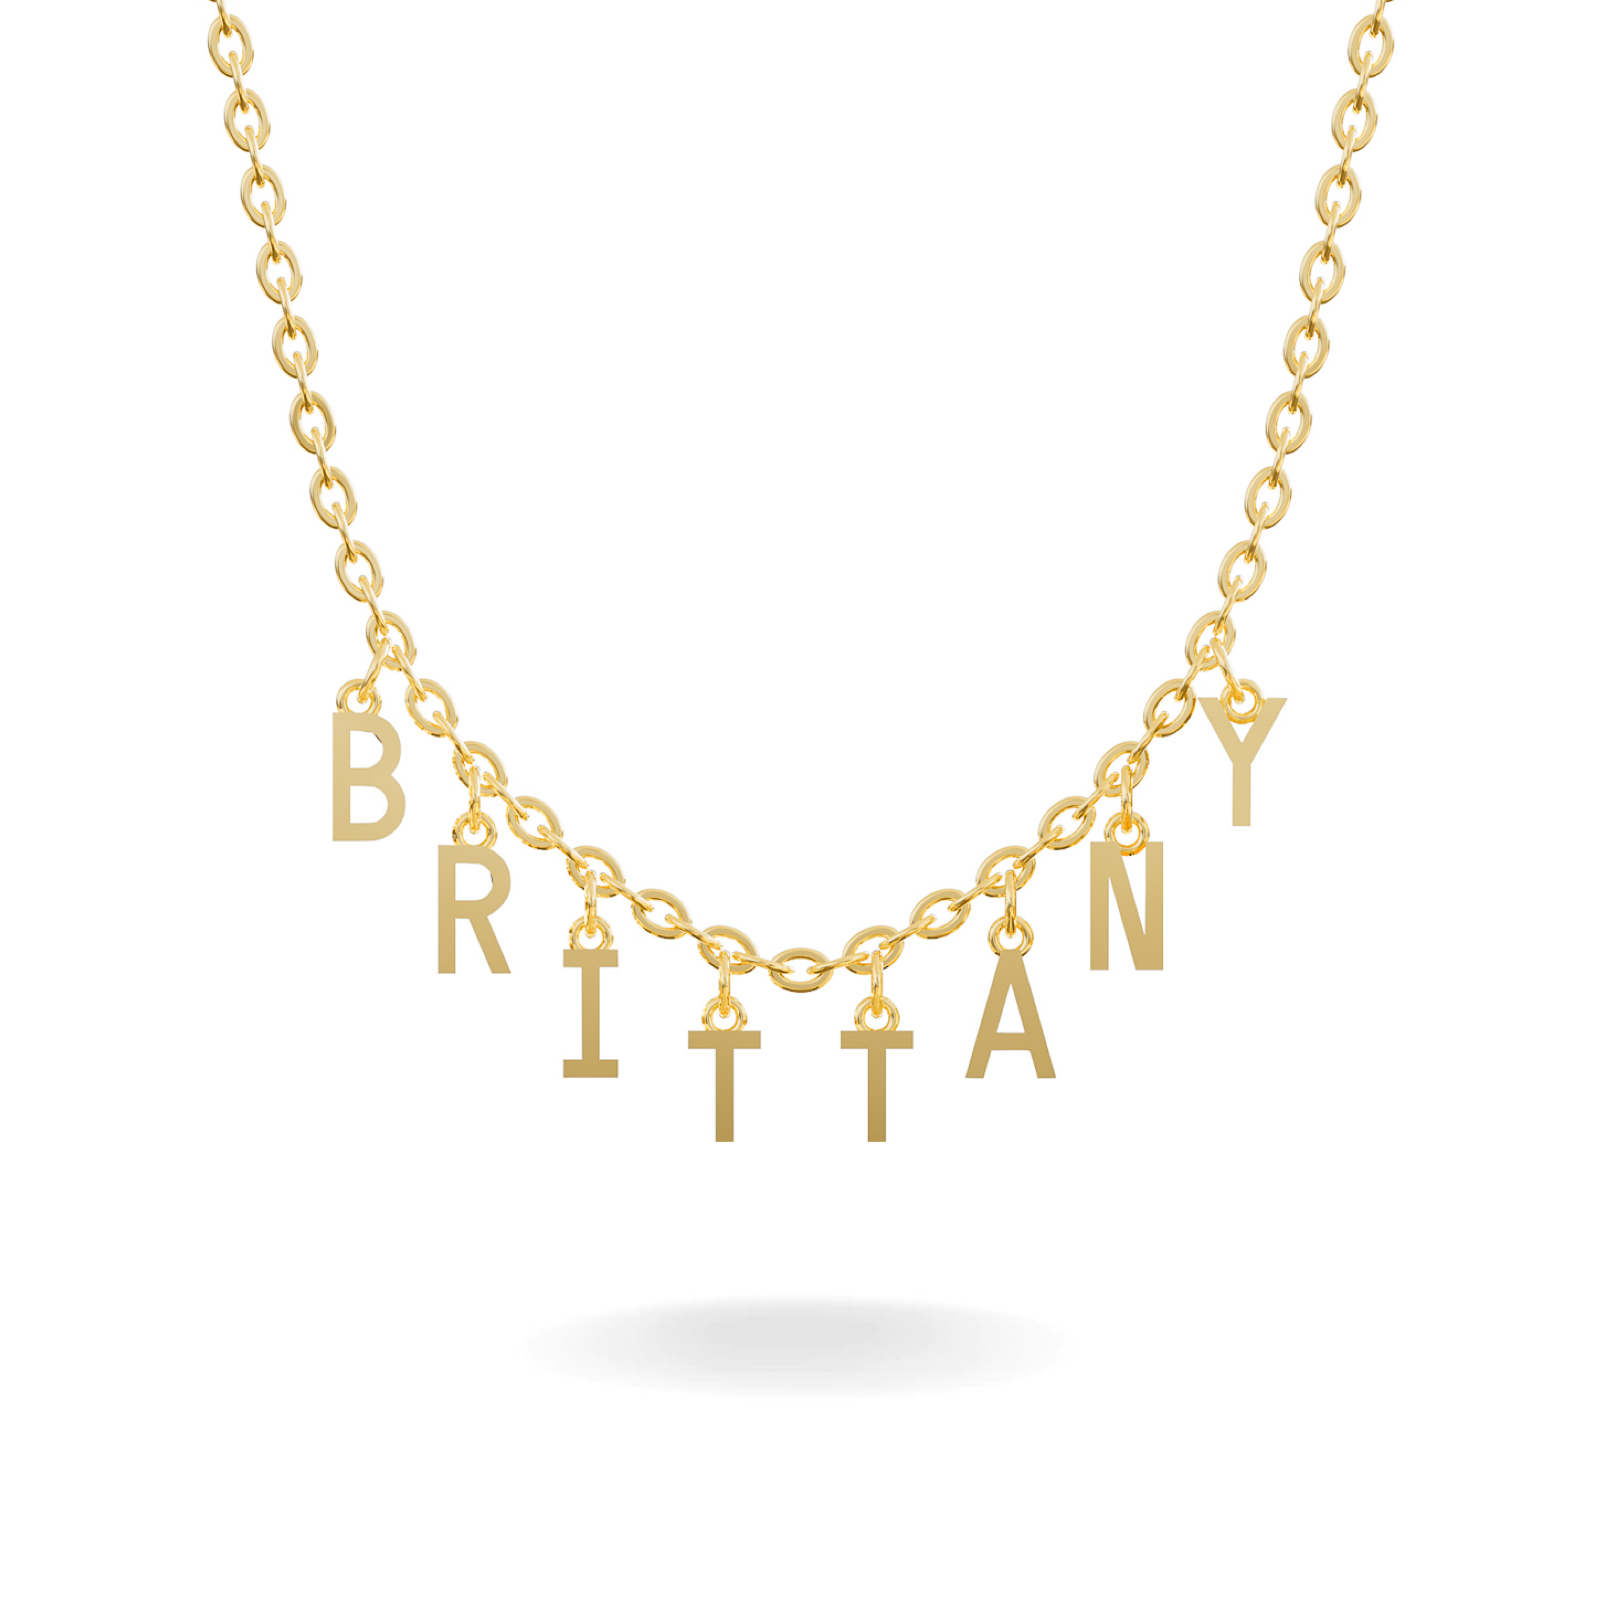 14K YELLOW GOLD SERIF DROP LETTERS NAME NECKLACE